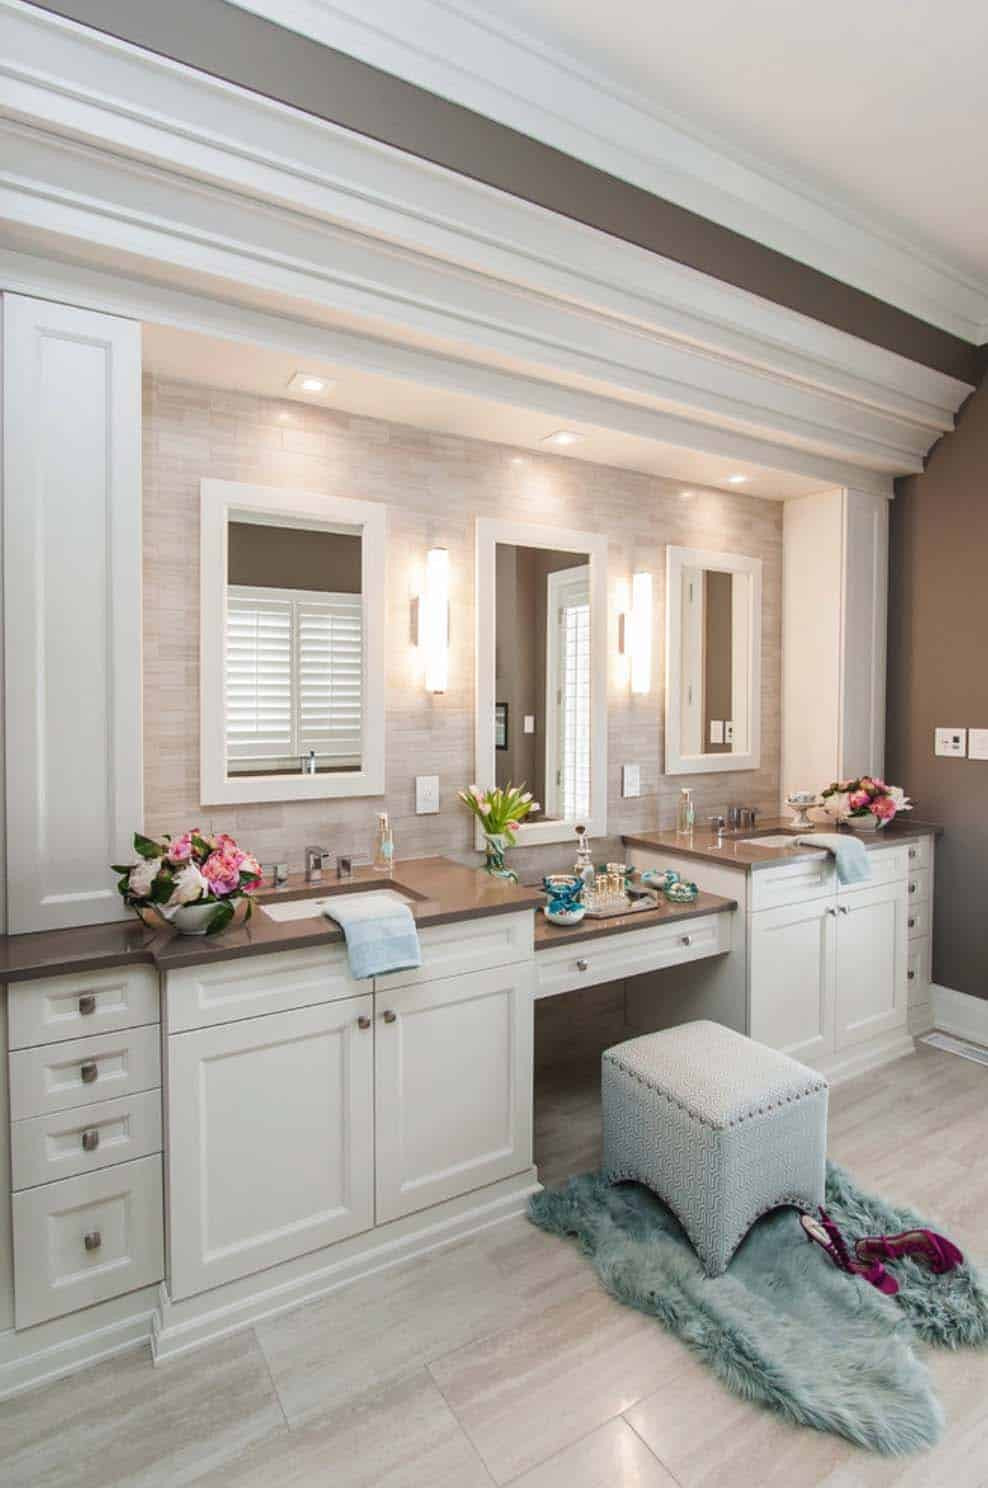 Remodeling Bathroom Ideas
 53 Most fabulous traditional style bathroom designs ever